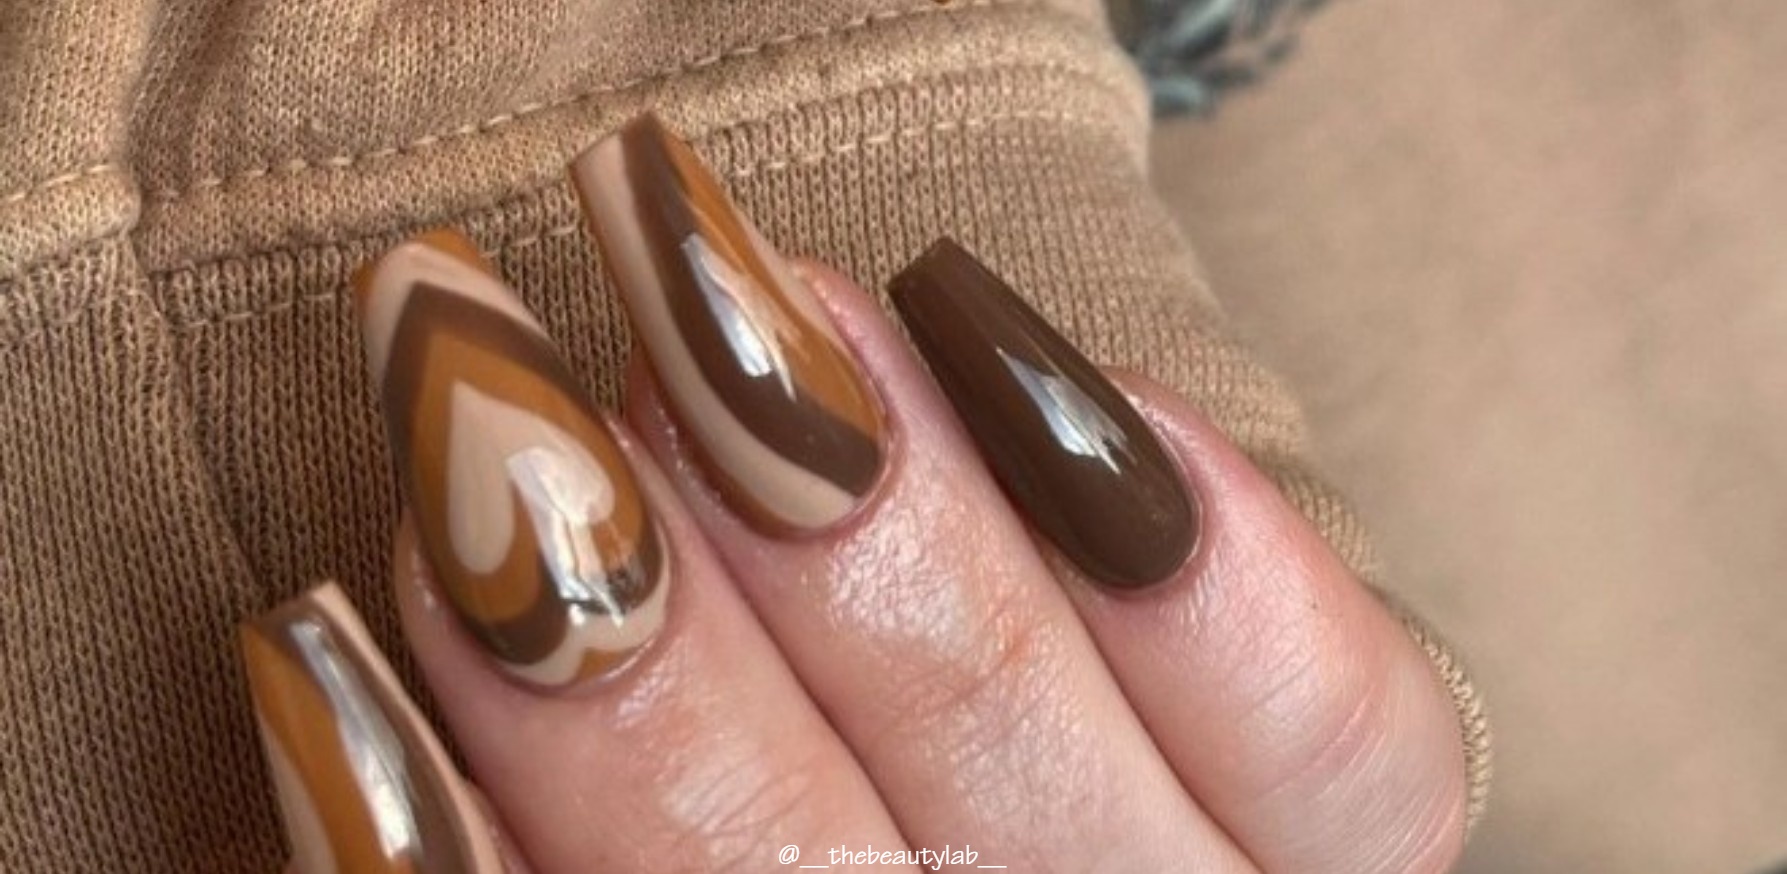 These Fall Nail Art Designs Are Sure To Steal All the Limelight